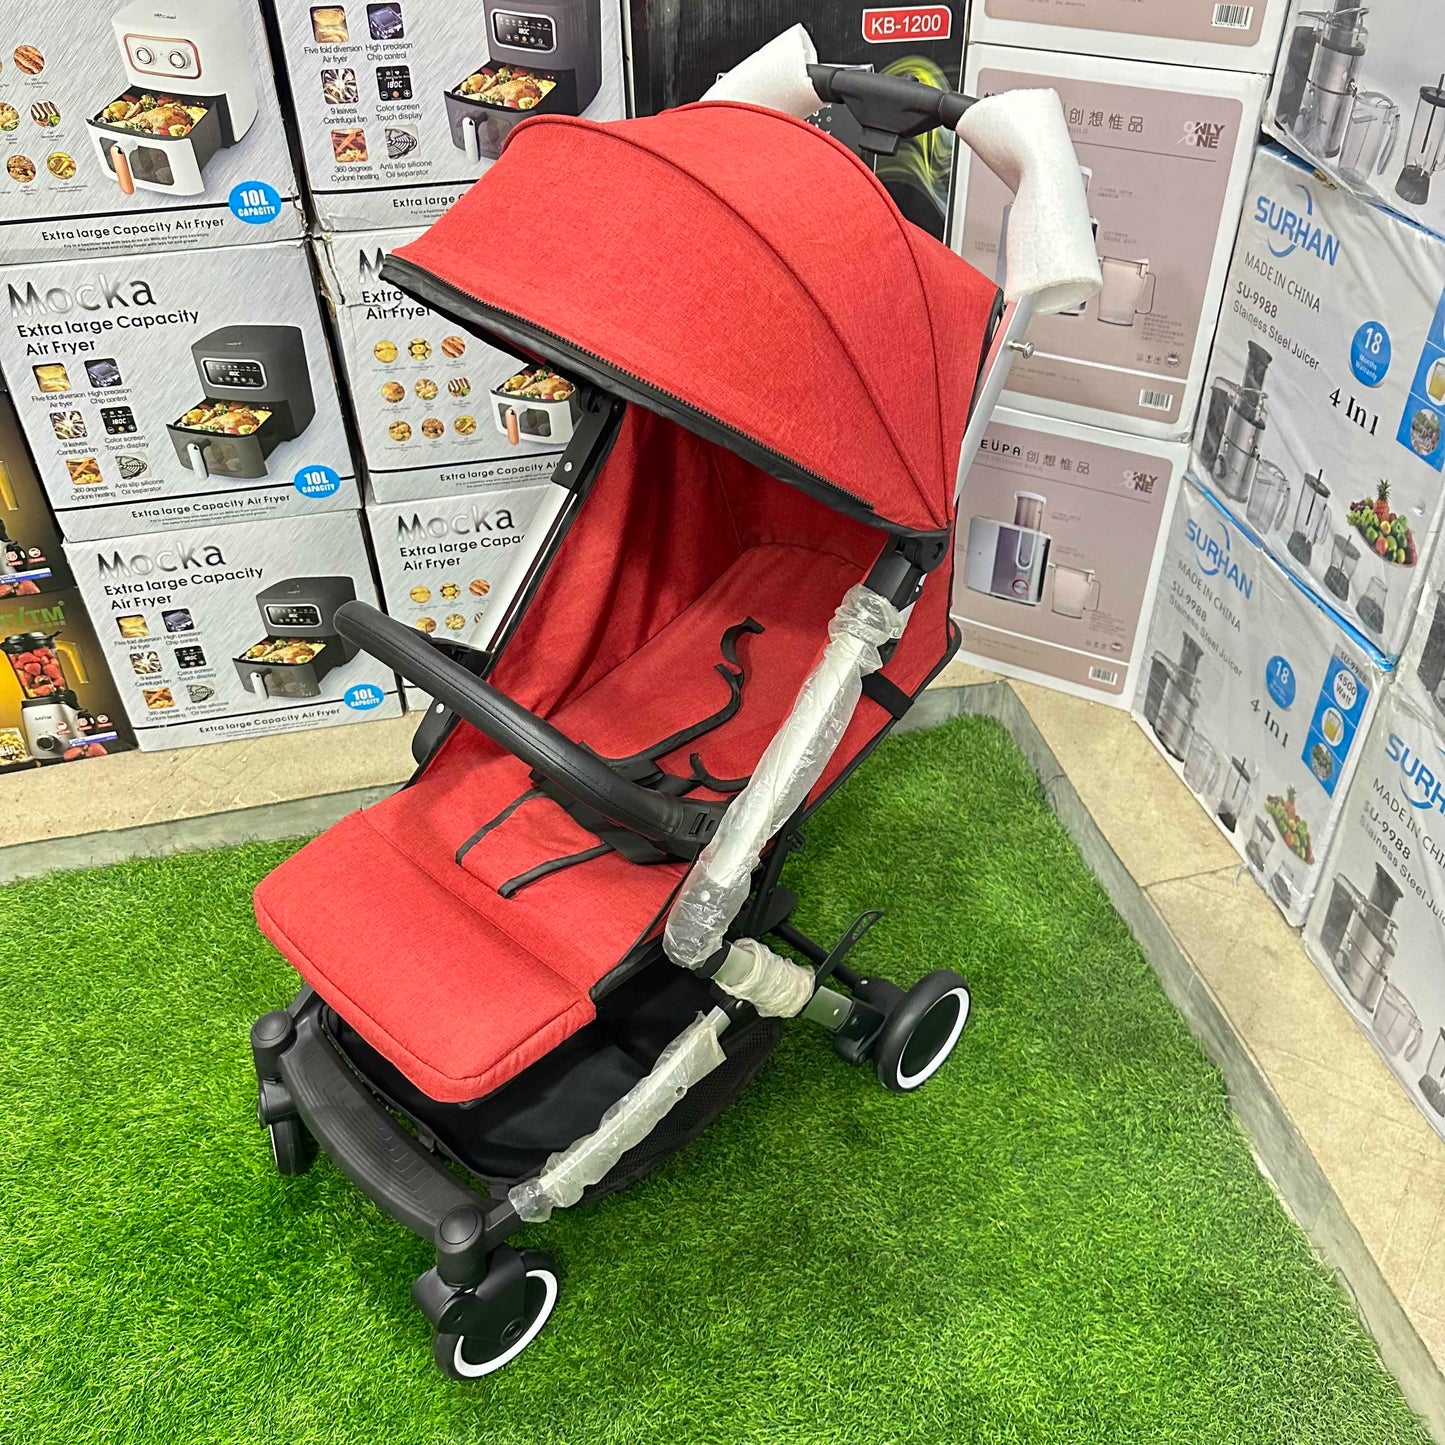 Imported MaikcQ Baby Stroller (308 – Red)